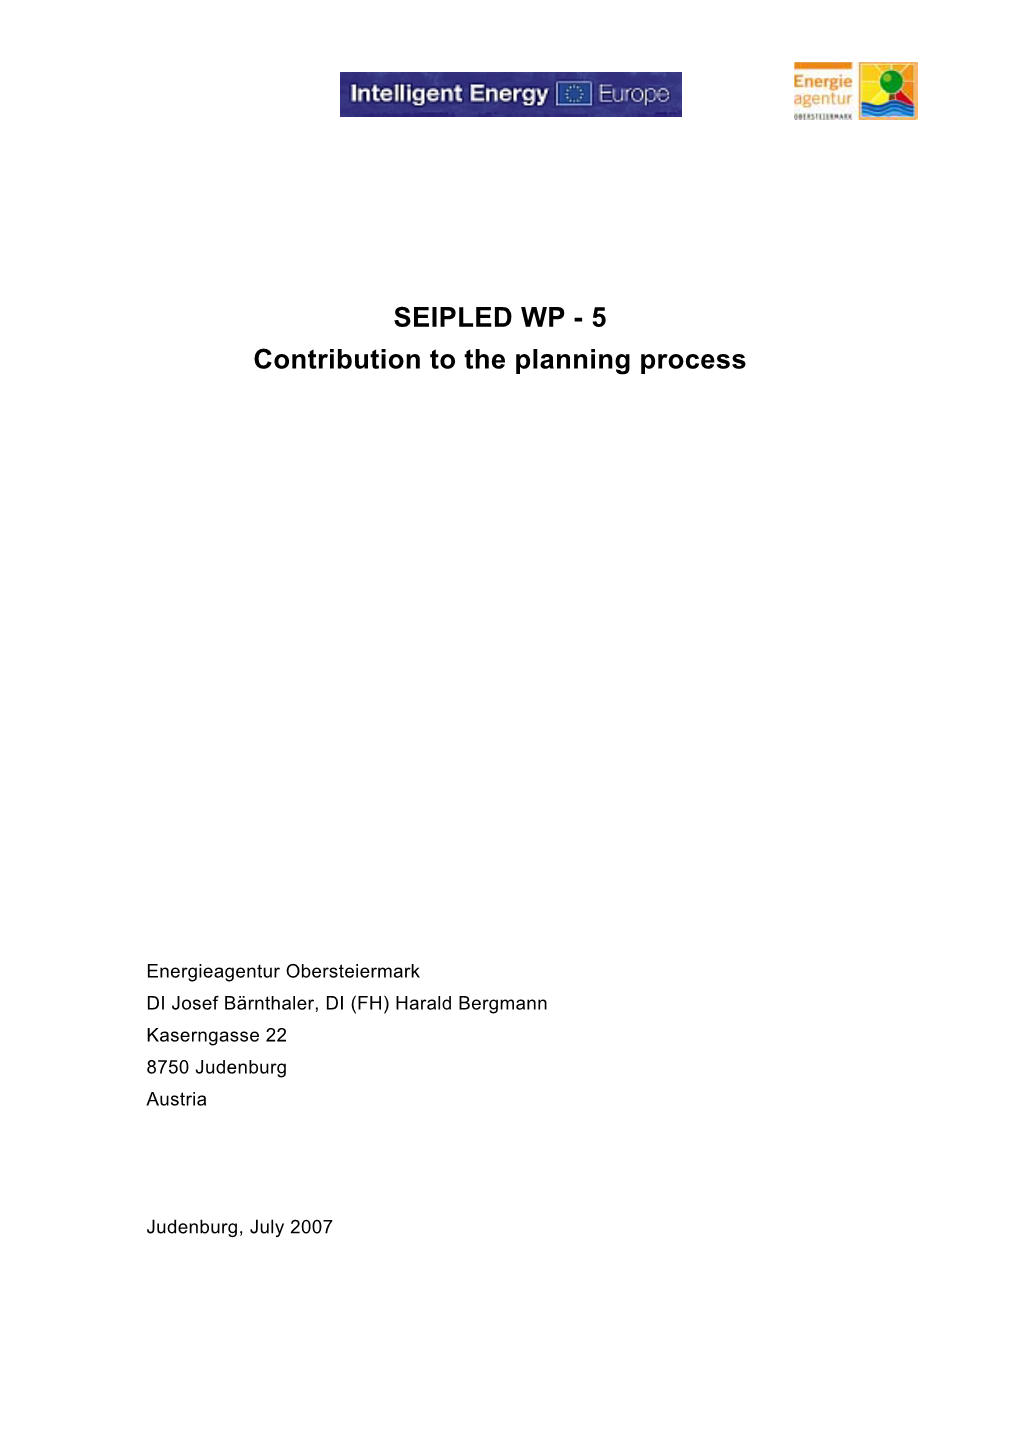 SEIPLED WP - 5 Contribution to the Planning Process